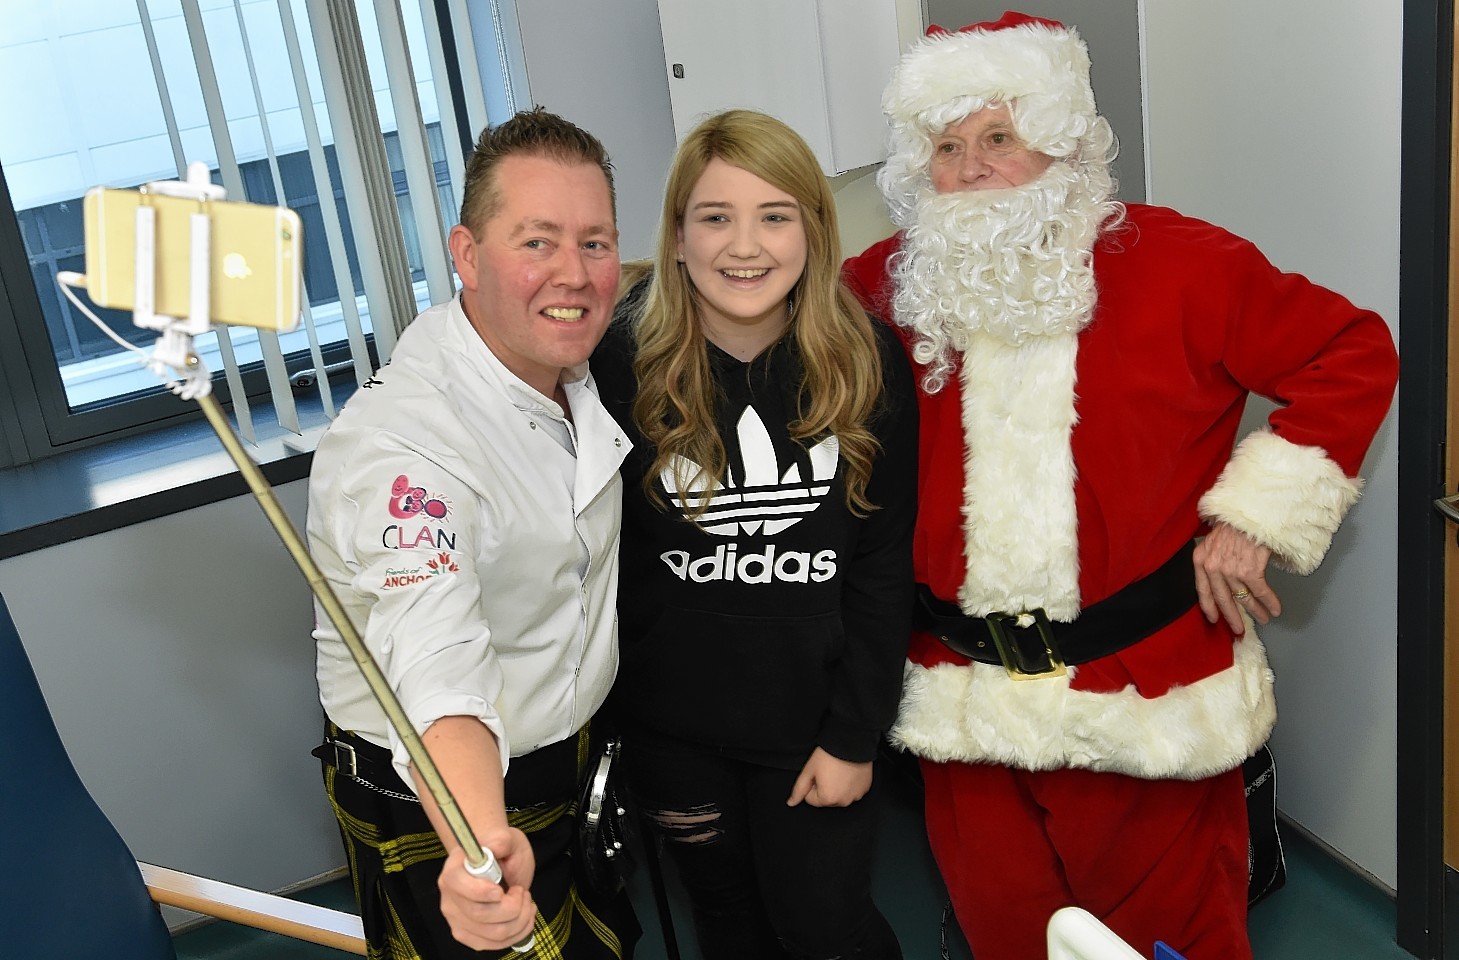 Santa and The Kilted Chef, Craig Wilson visited the Anchor Unit at ARI to hand out gifts and sweet treats to patients.